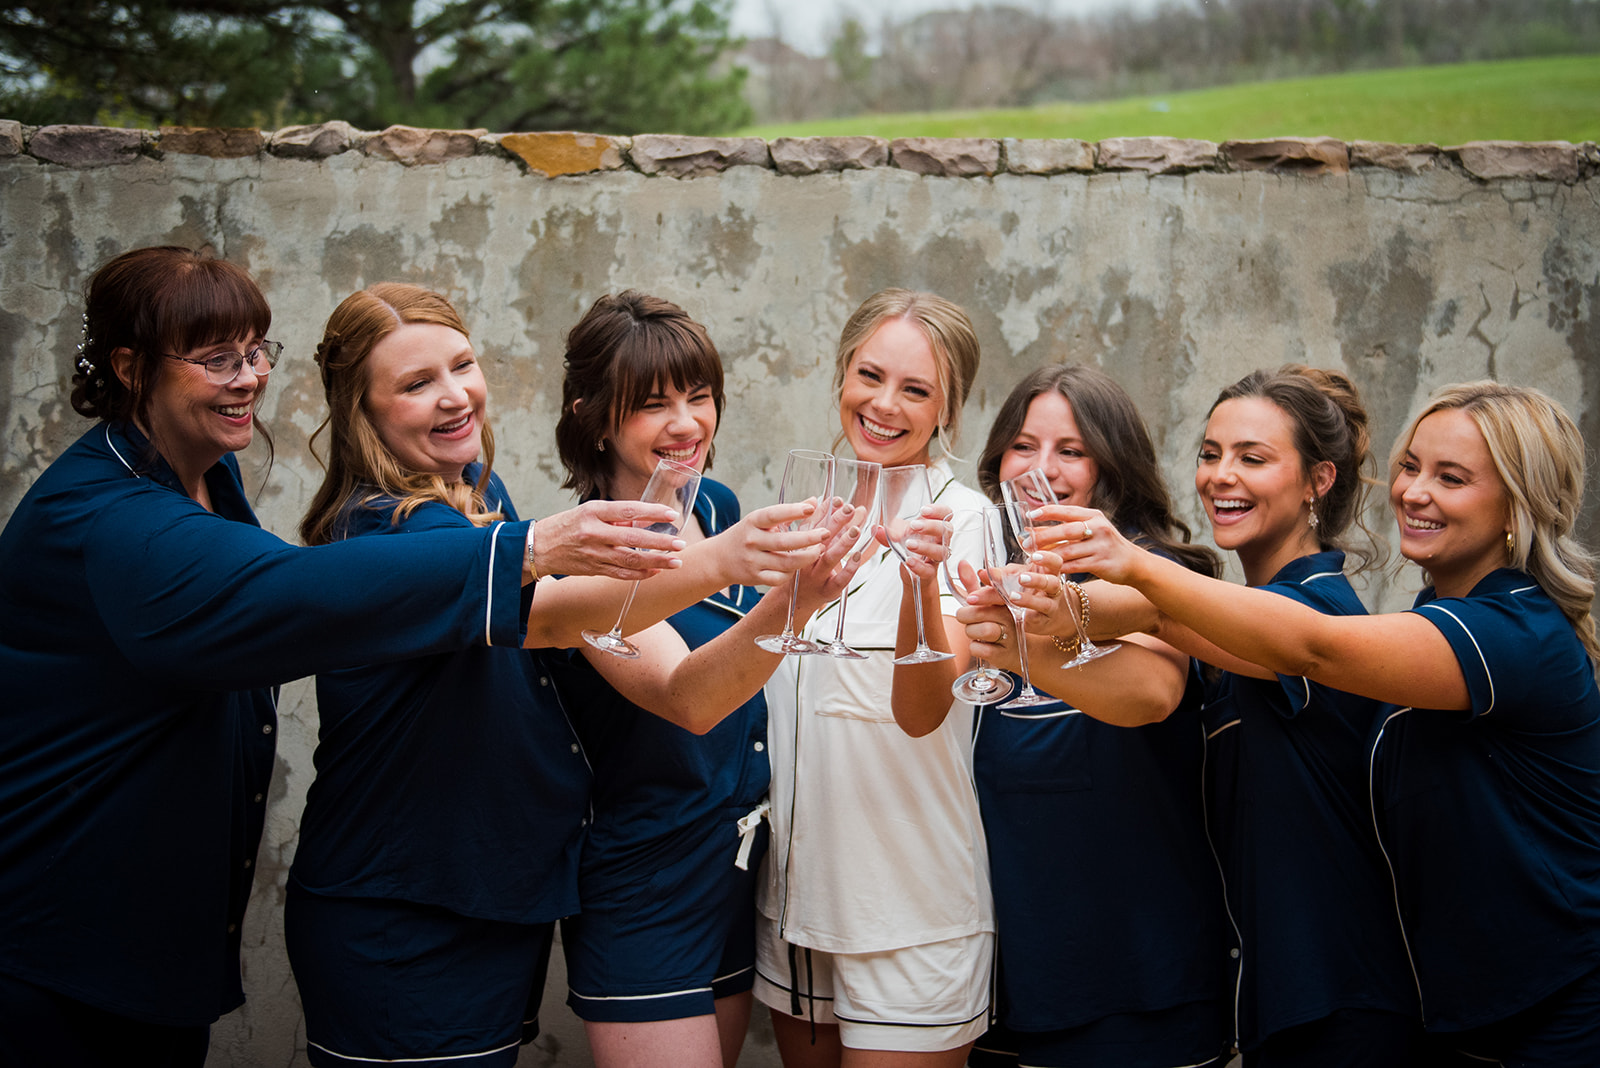 Bridesmaids and bride stand together toasting with glasses of champagne.